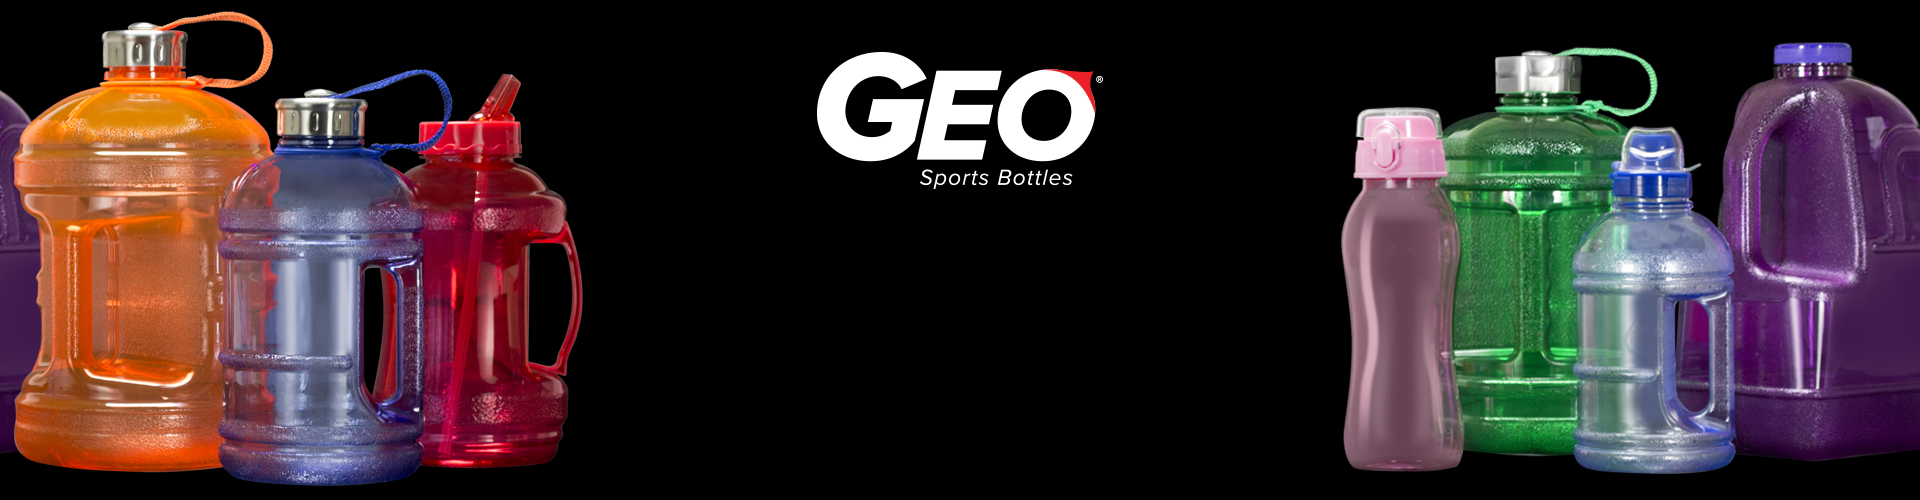 GEO Sports Bottle 24oz Glass Reusable Water Bottle w/ Protective